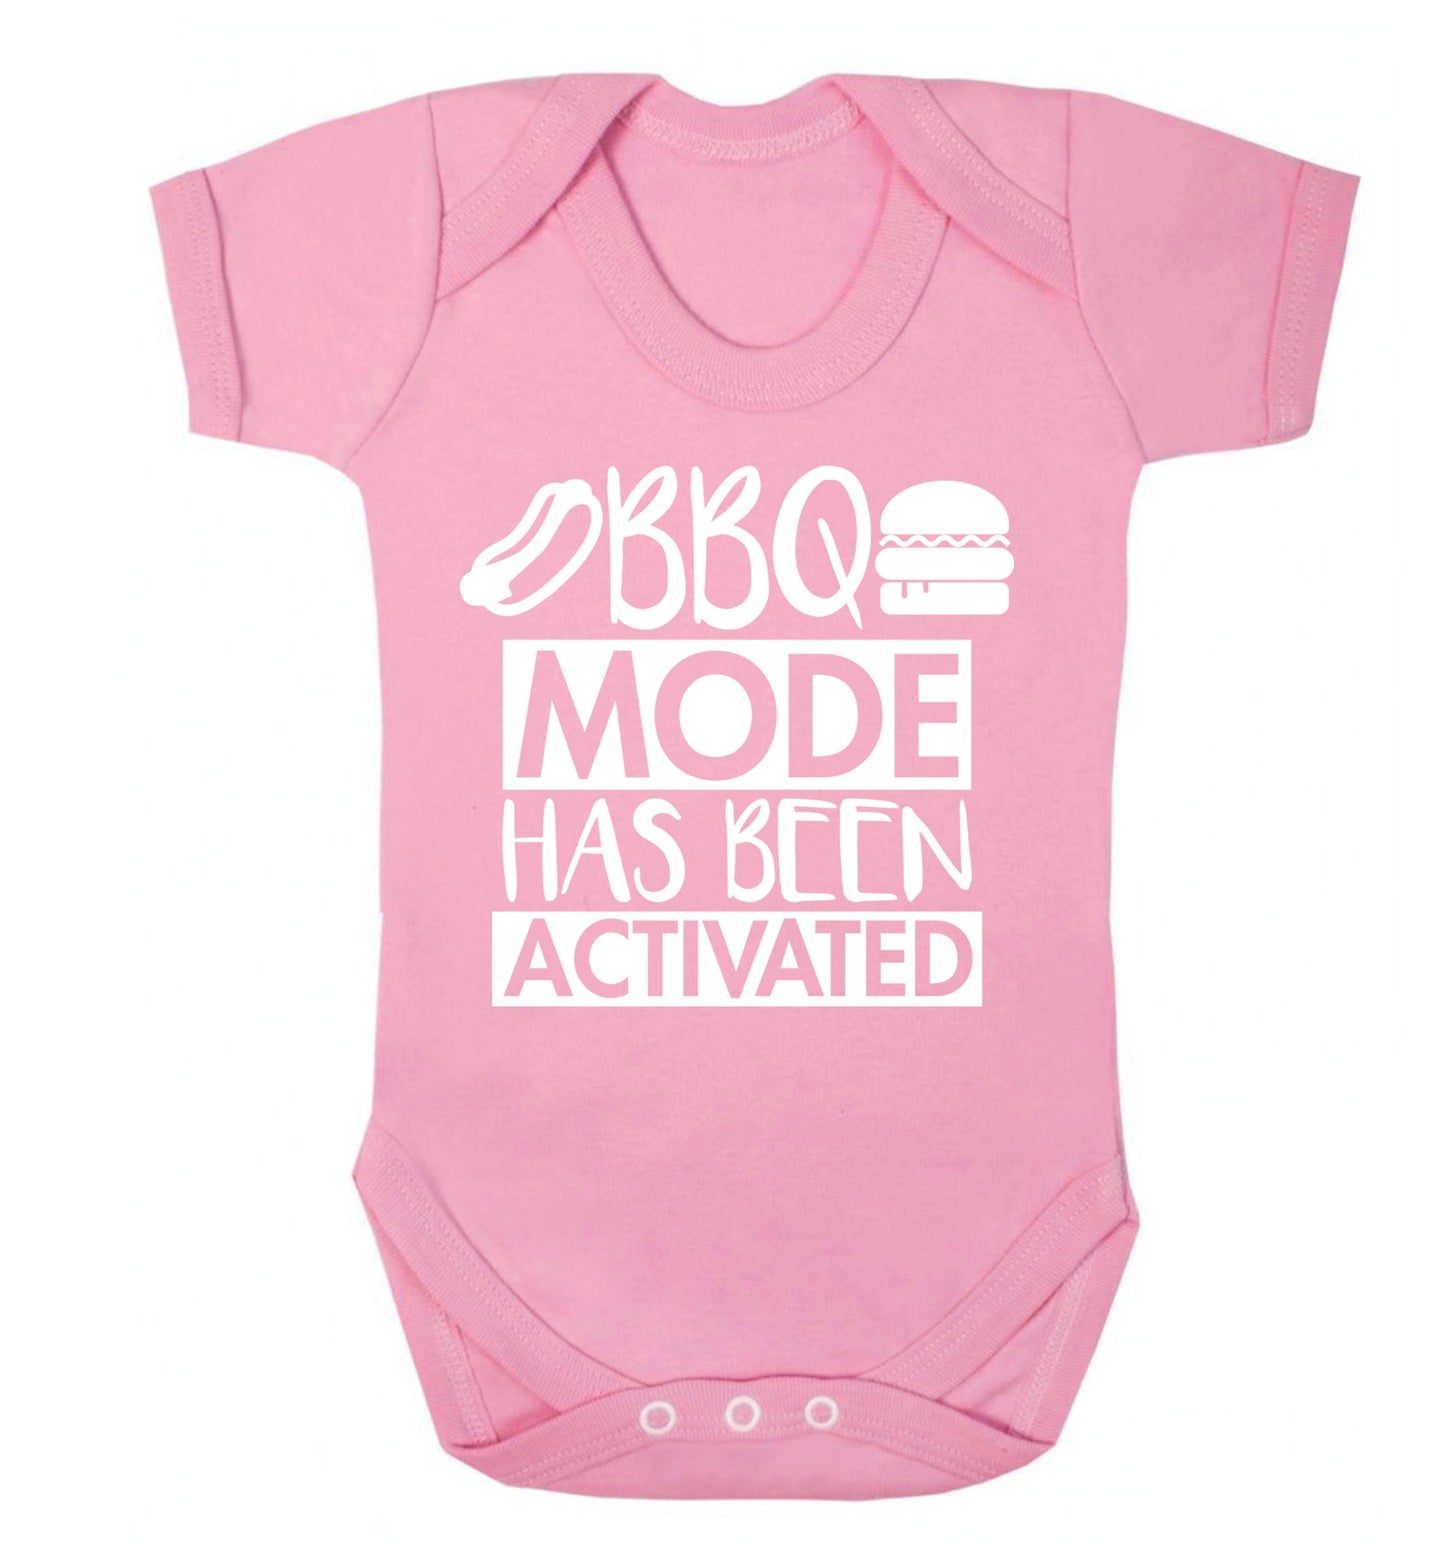 Bbq mode has been activated Baby Vest pale pink 18-24 months